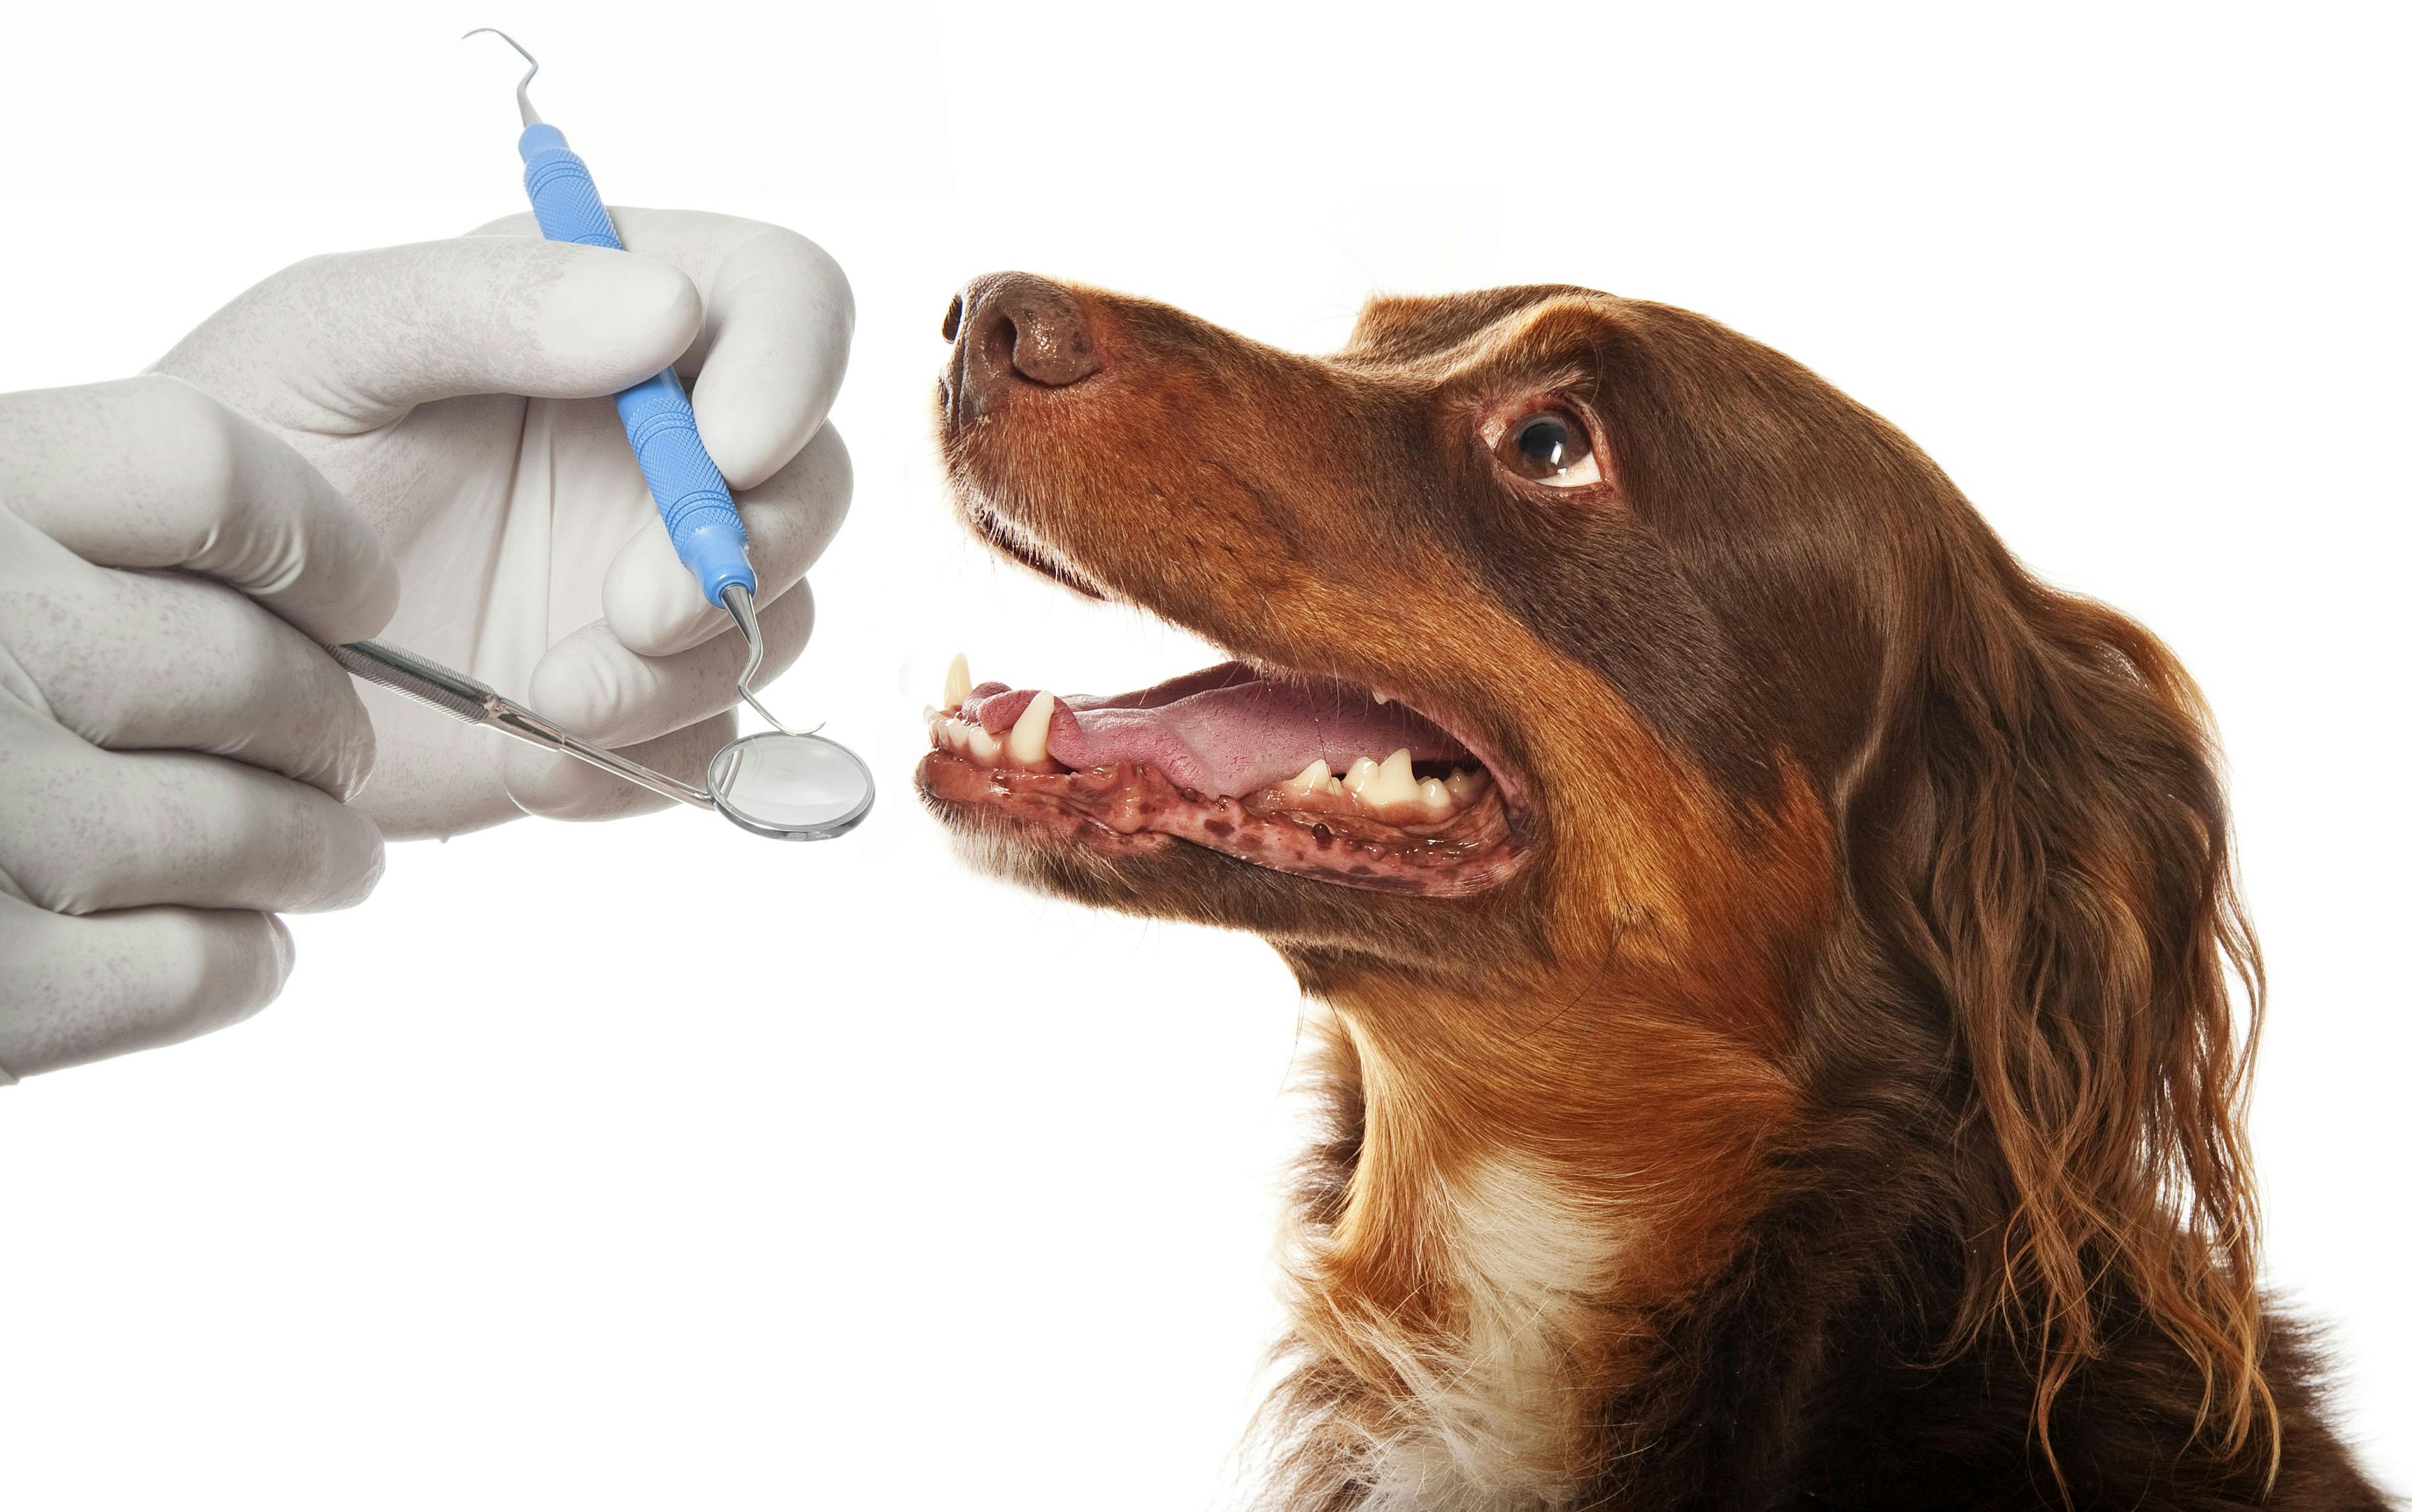 NAVC offers dentistry summit to address oral disease in pets